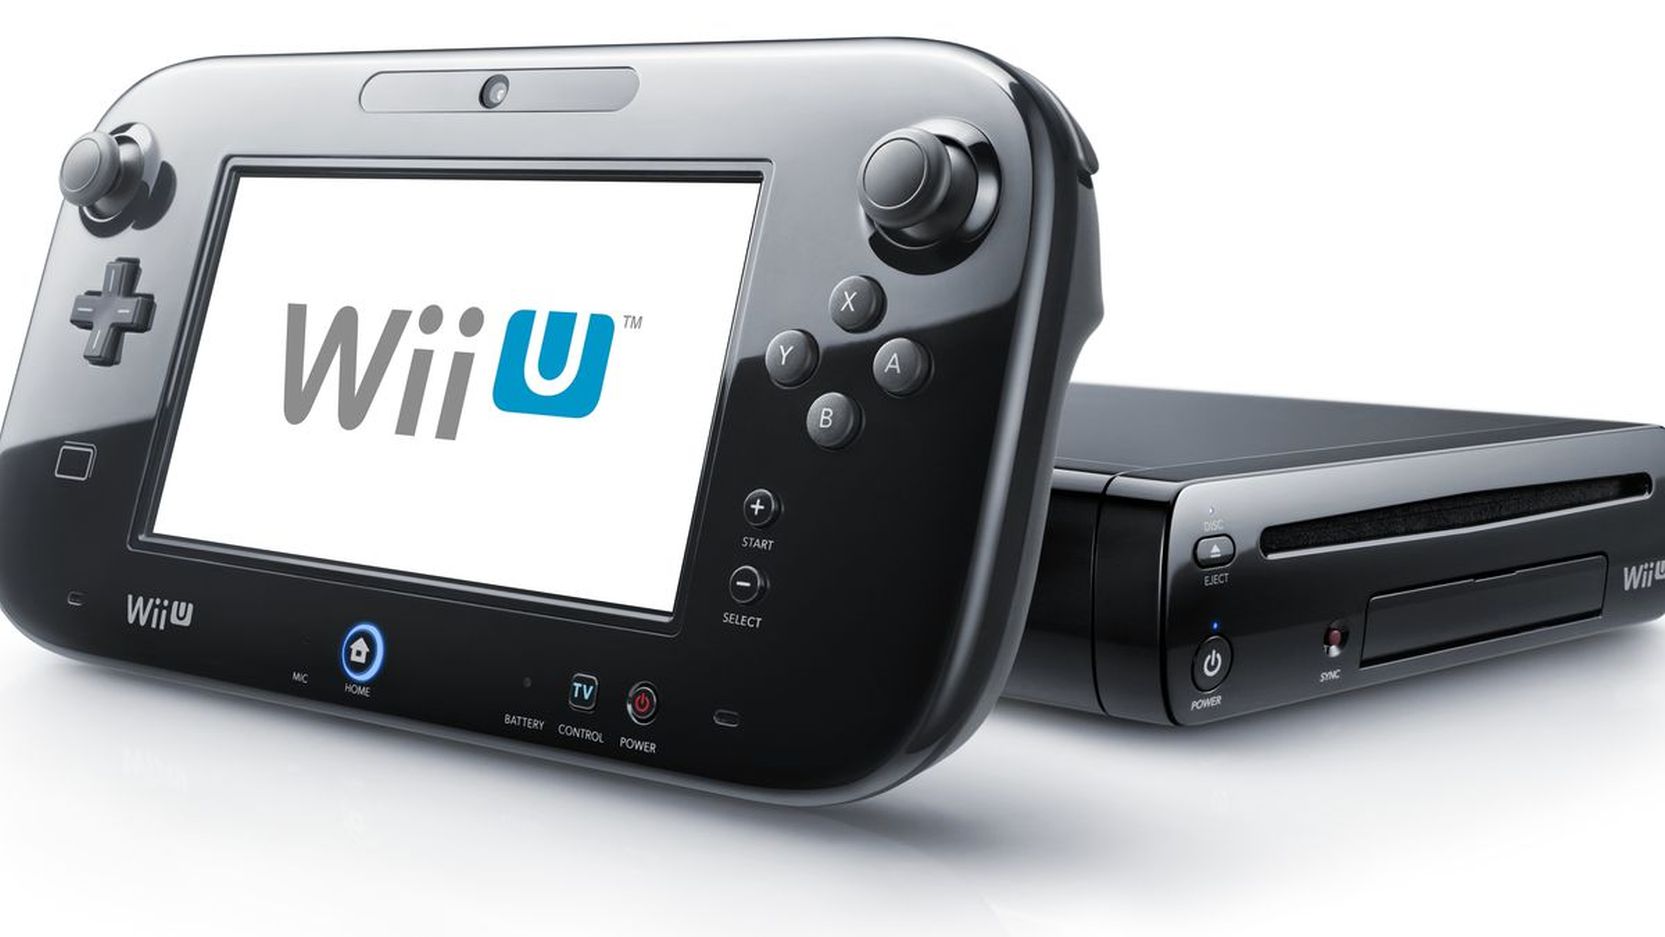 Image for The Wii U and Nintendo 3DS eShop will be shutdown next year